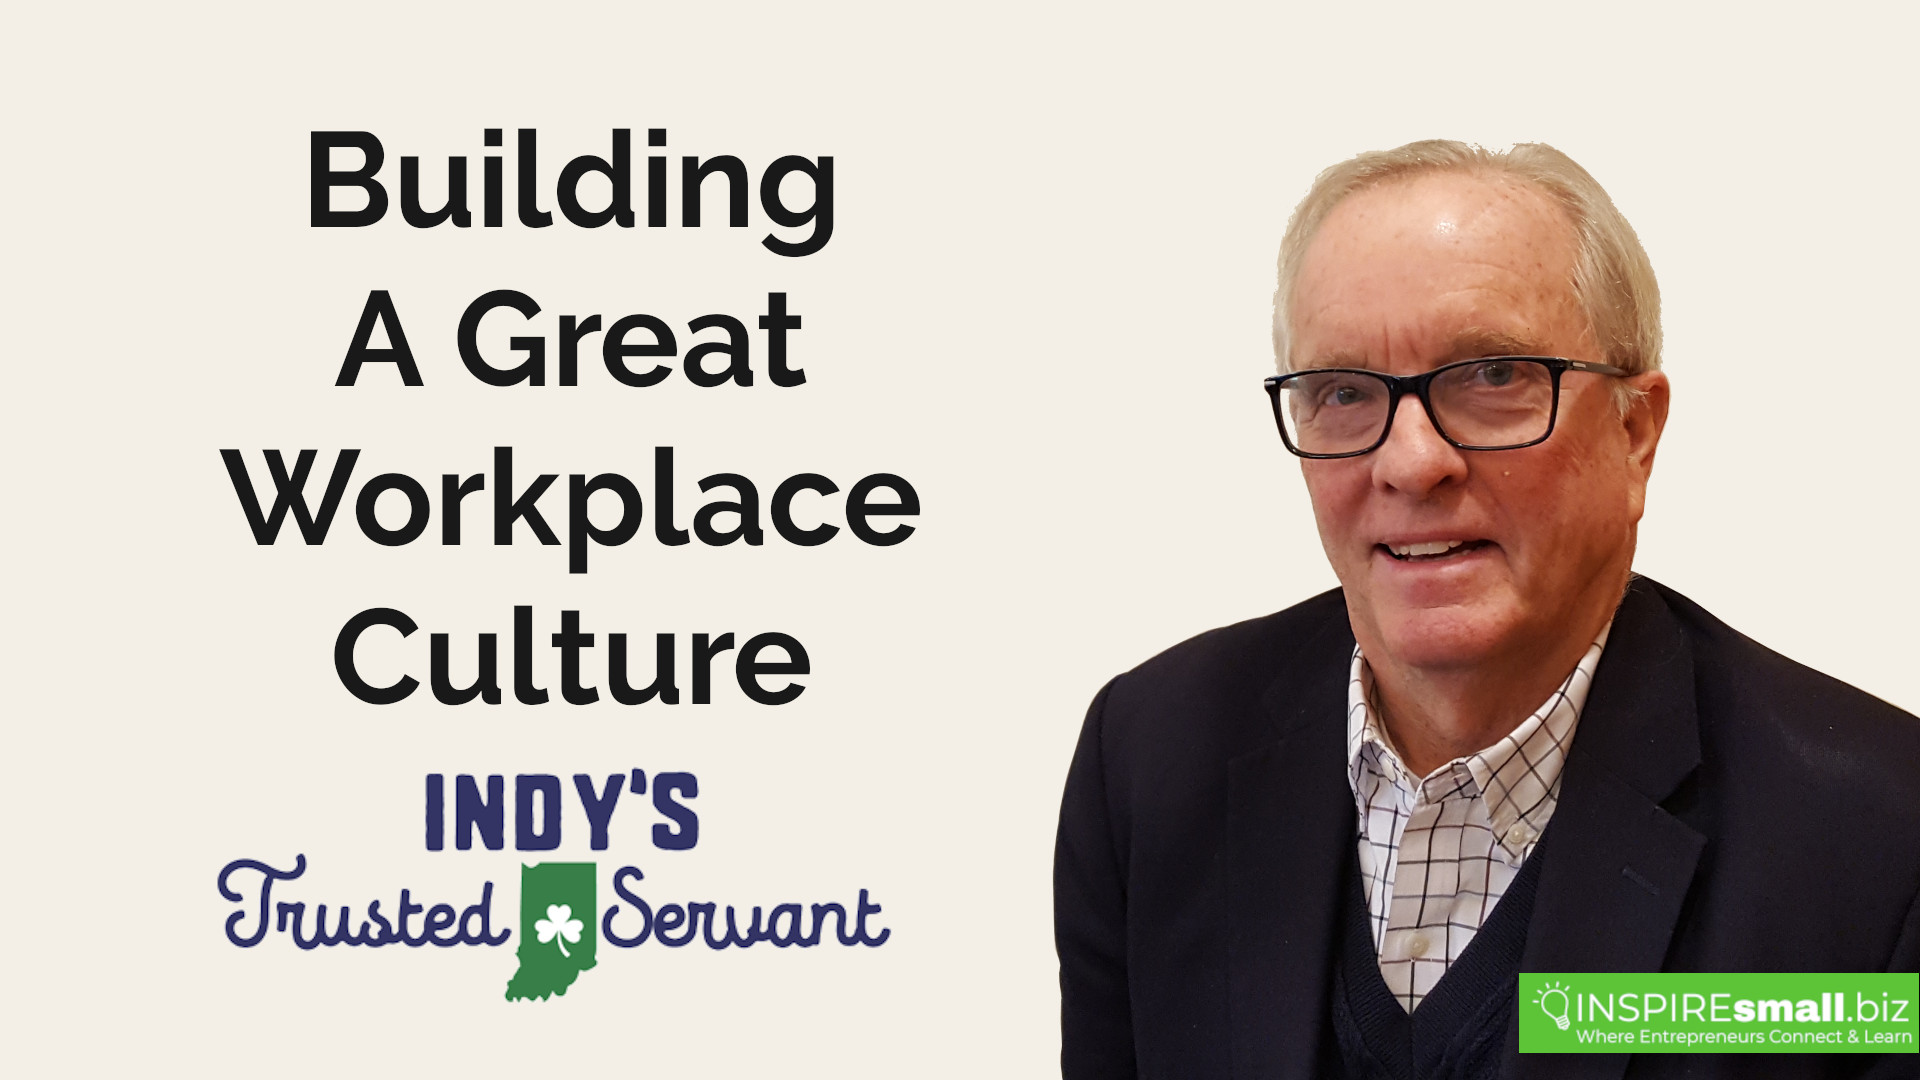 Building A Great Workplace Culture with Indy's Trusted Servant, and an image of Danny O'Malia over a plain cream colored background.